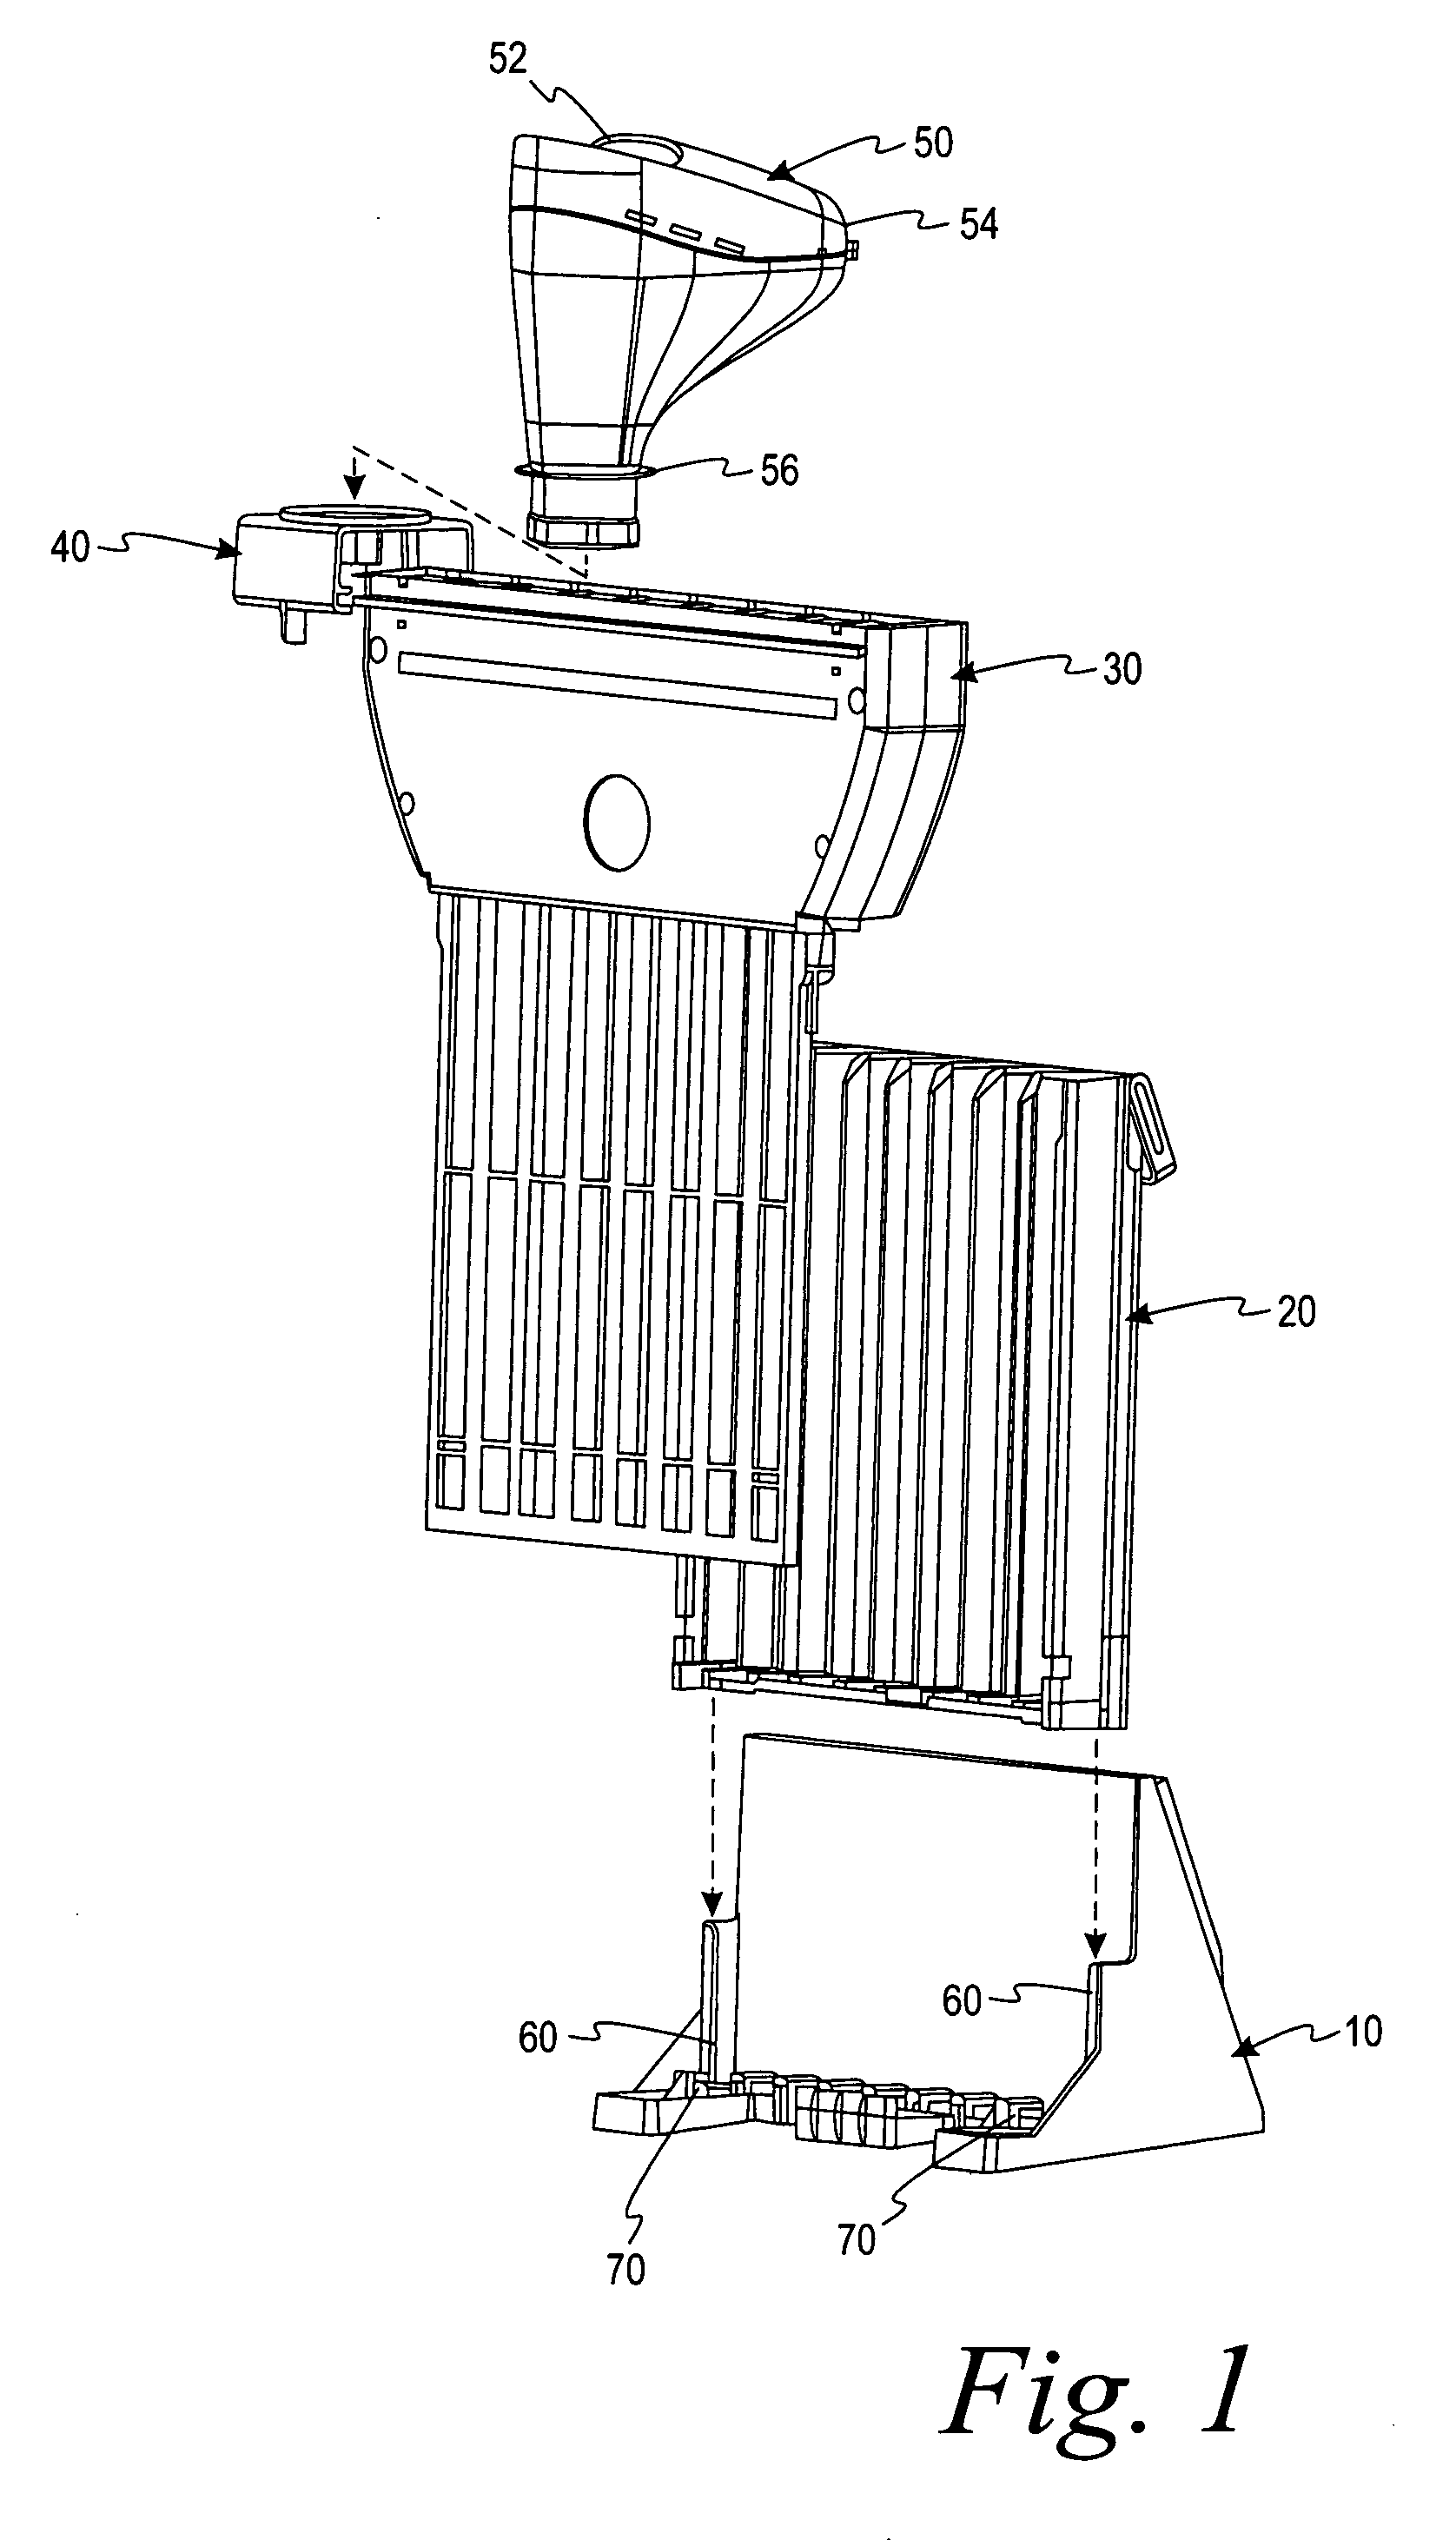 System, method and apparatus for automatically filling a coin cassette